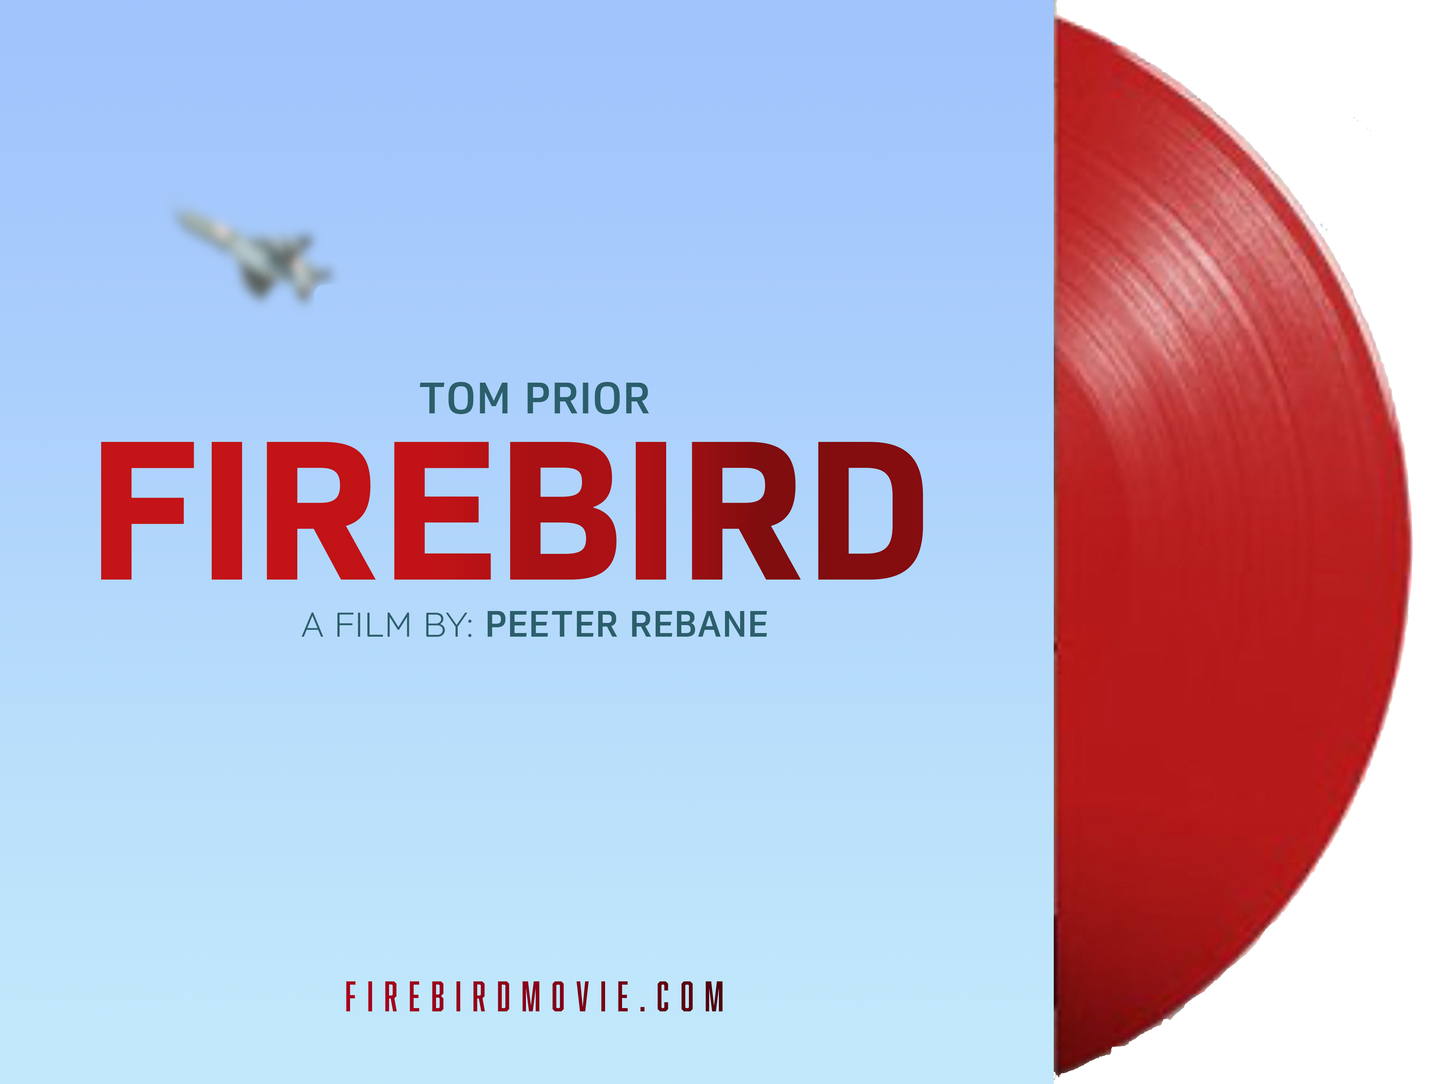 Special Edition Vinyl Soundtrack (Red)